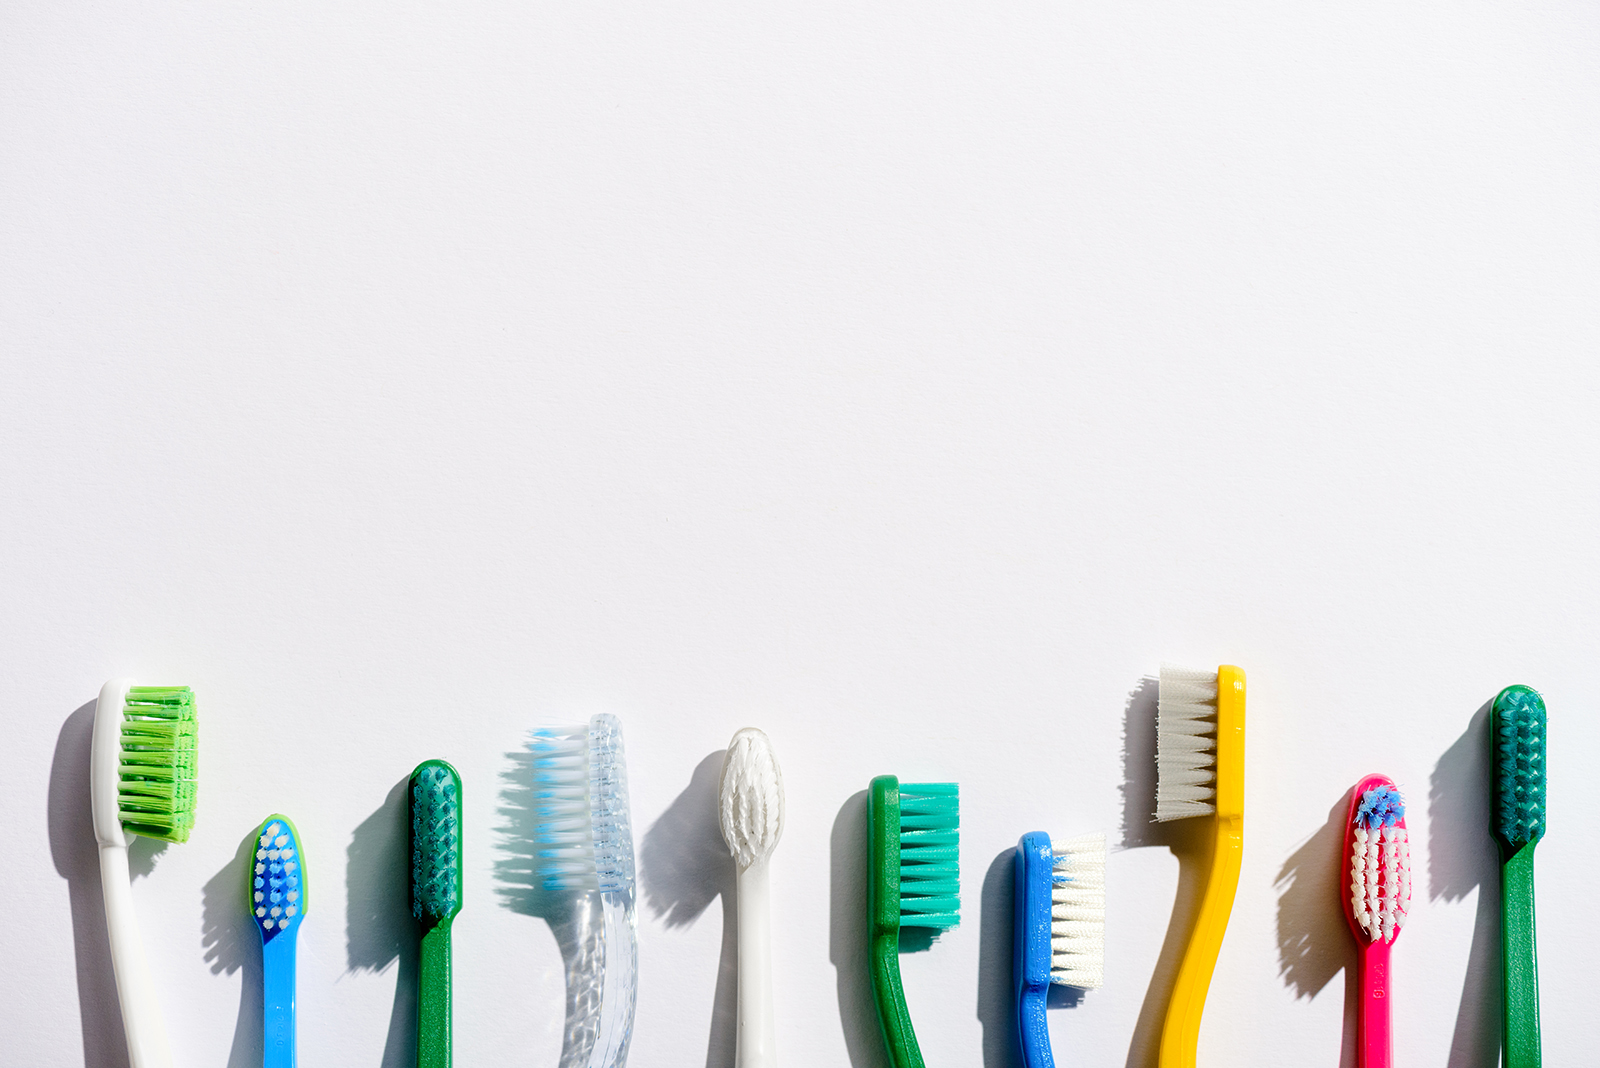 Ask Your Forney Dentist: How to Choose the Best Toothbrush